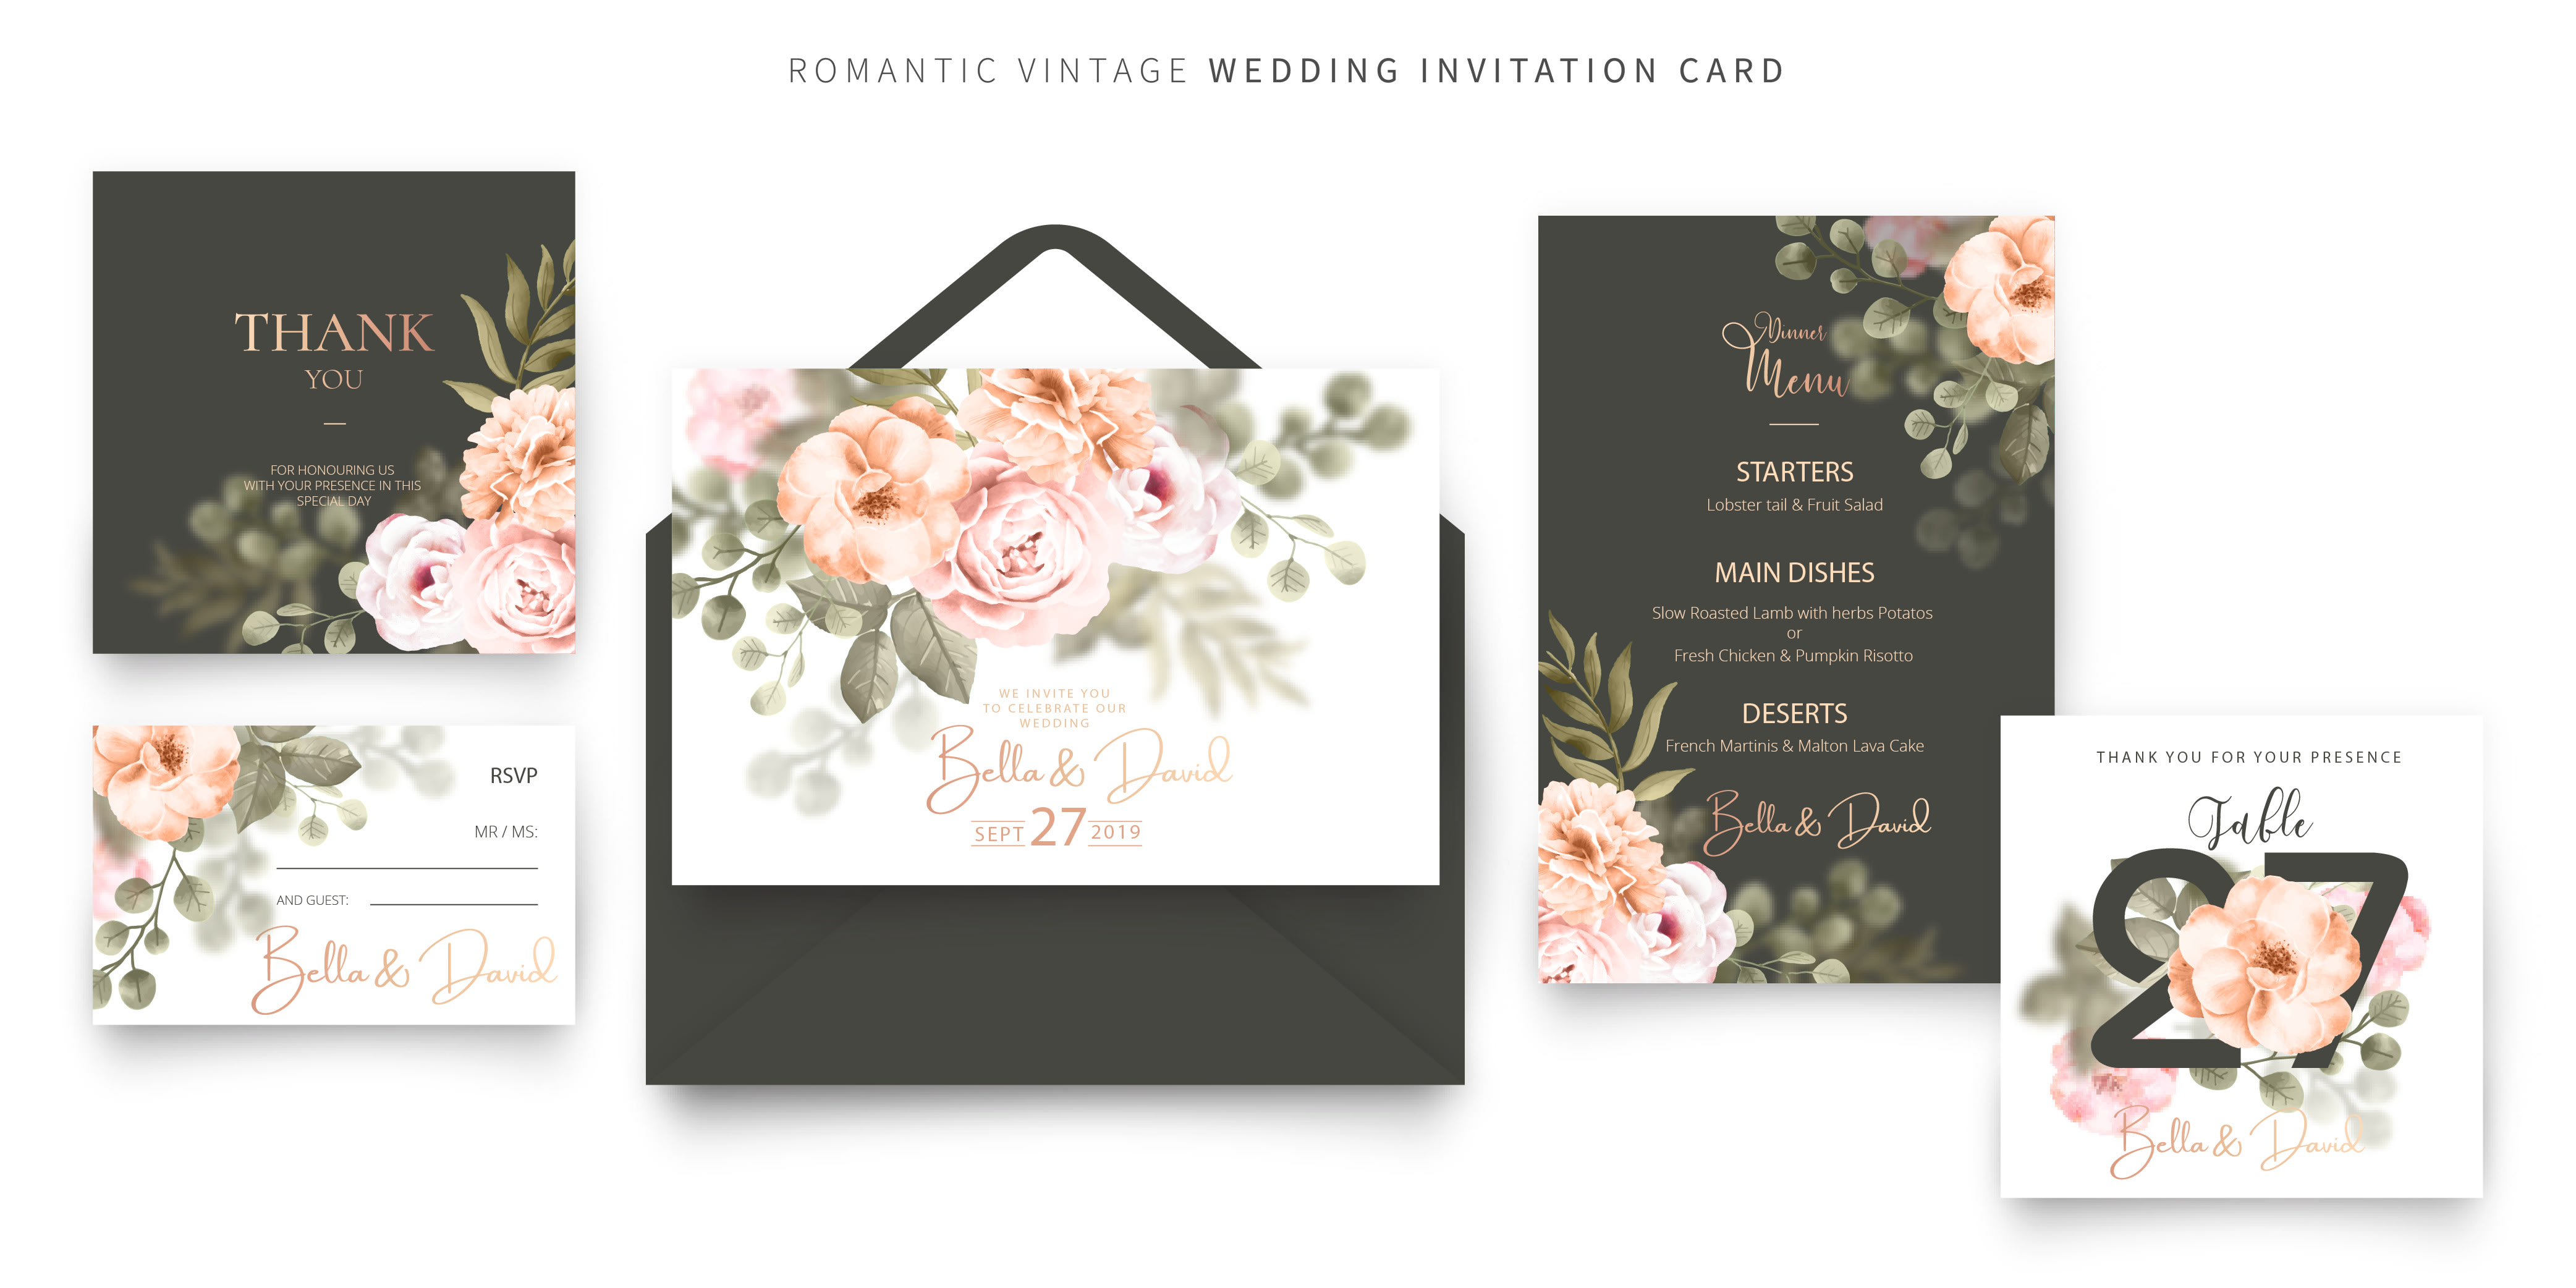 Design A Wedding Card Or Invitation Card For Any Event By Kimhira